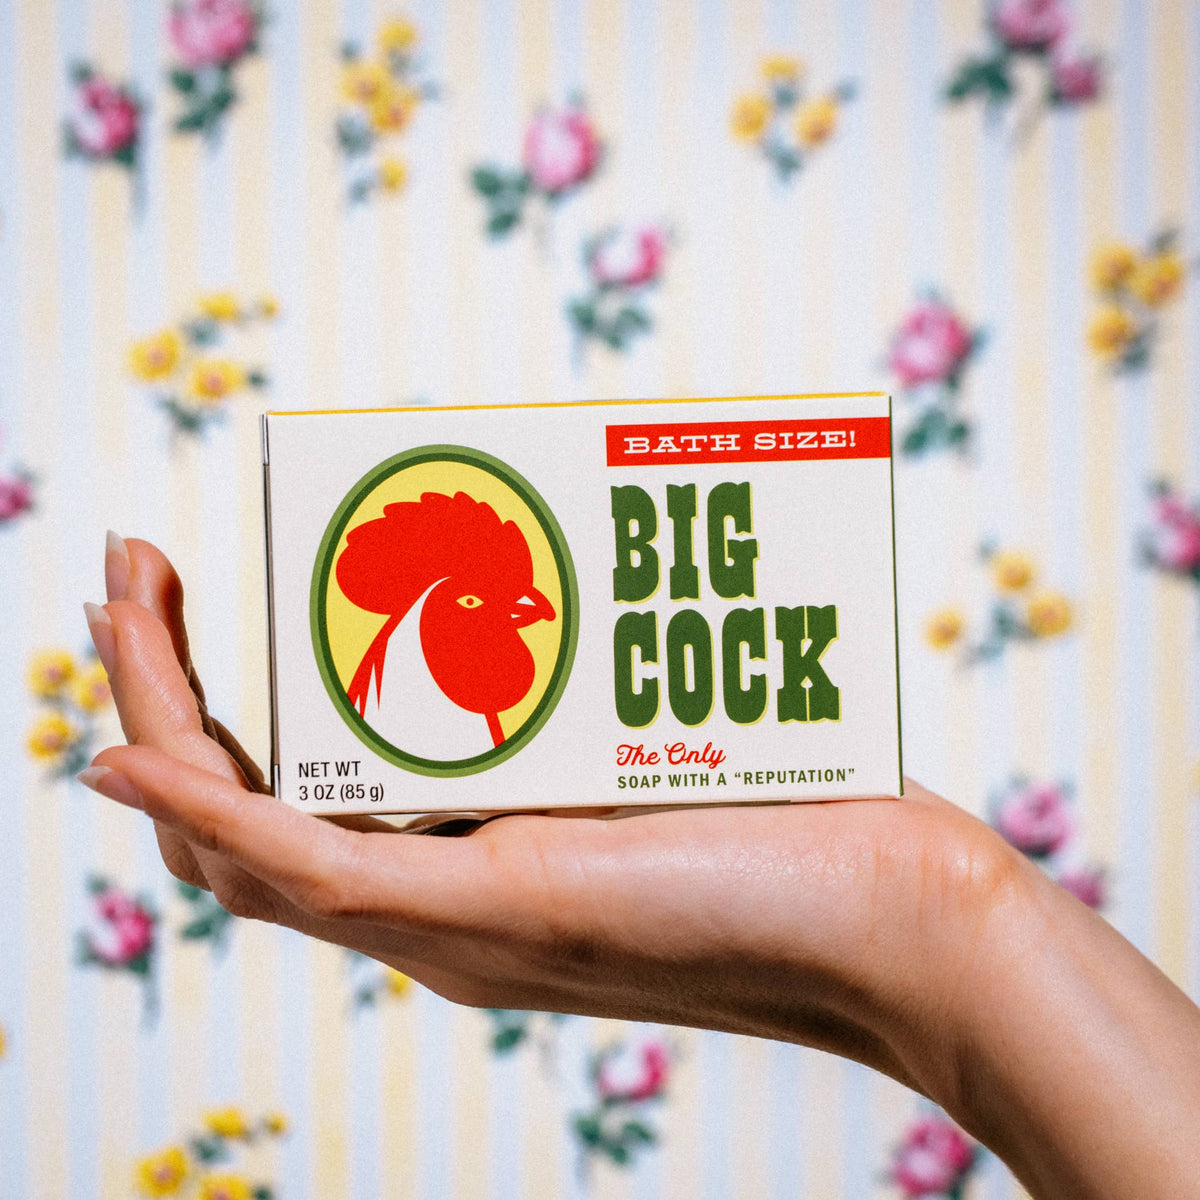 Whiskey River Soap Co. Big Cock Triple Milled Boxed Bar Soap | Funny Soap